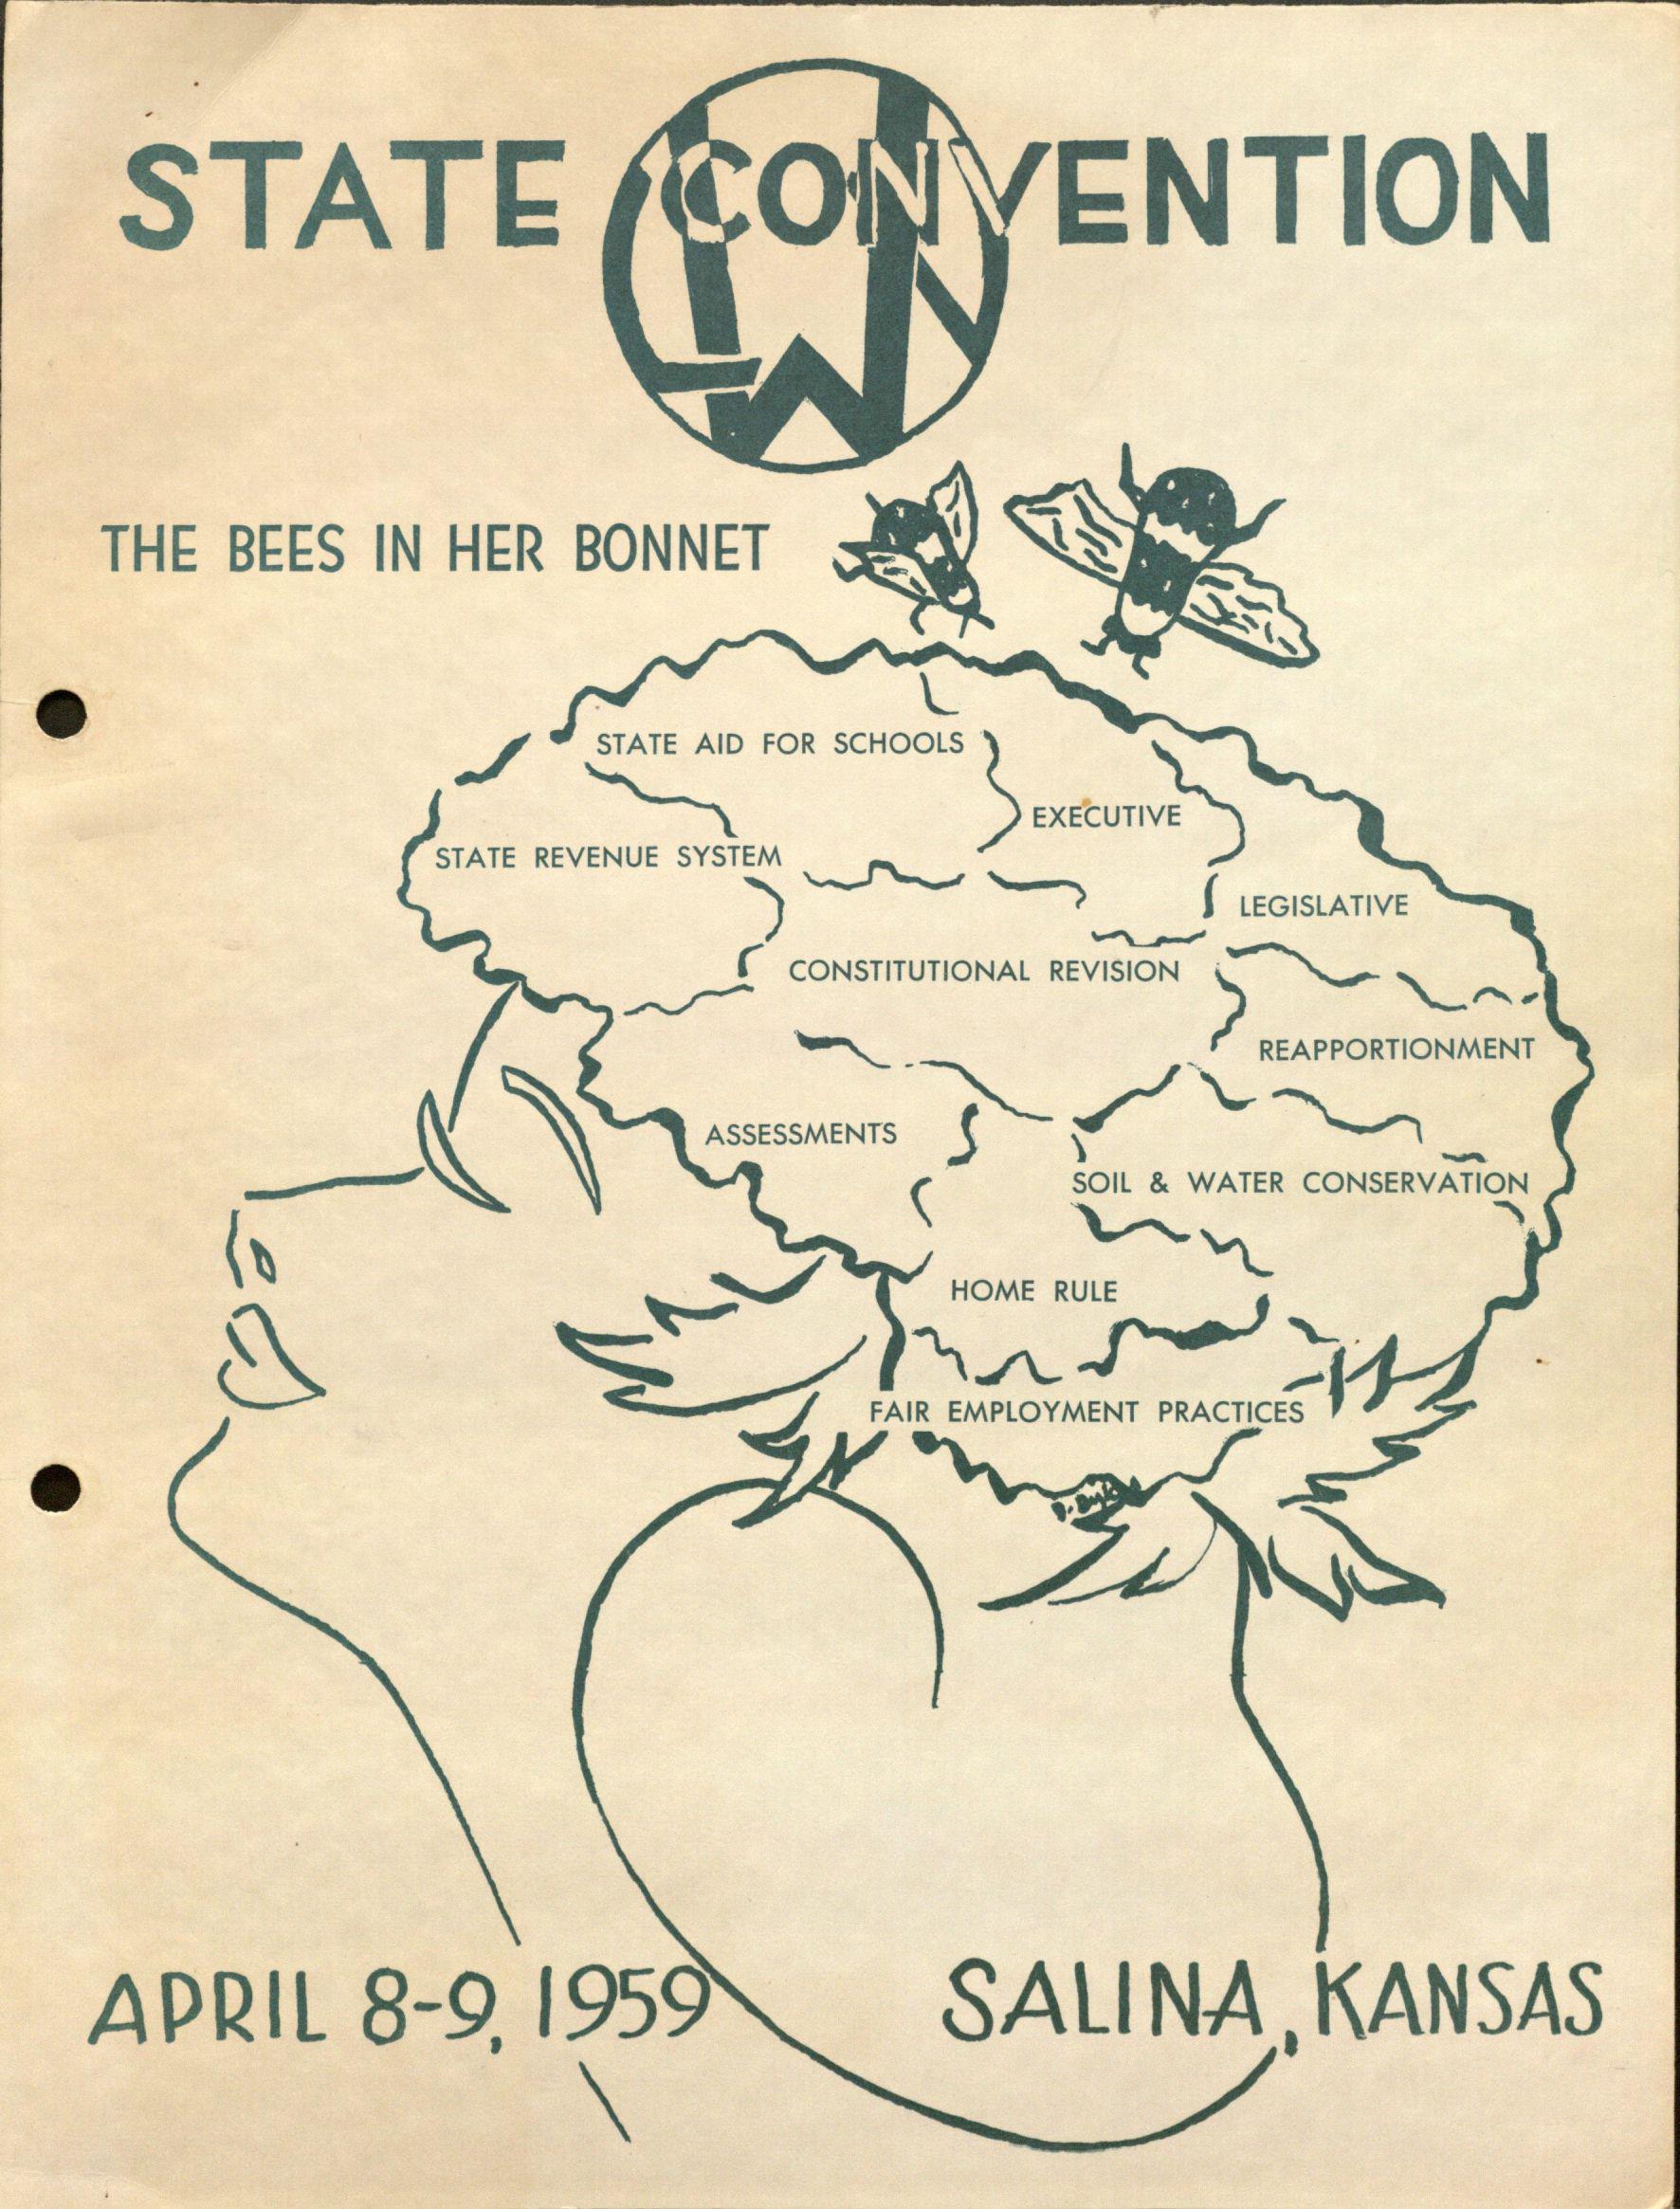 Cover of the April 8-9, 1959 League of Women Voters State Convention program in Salina, Kansas.